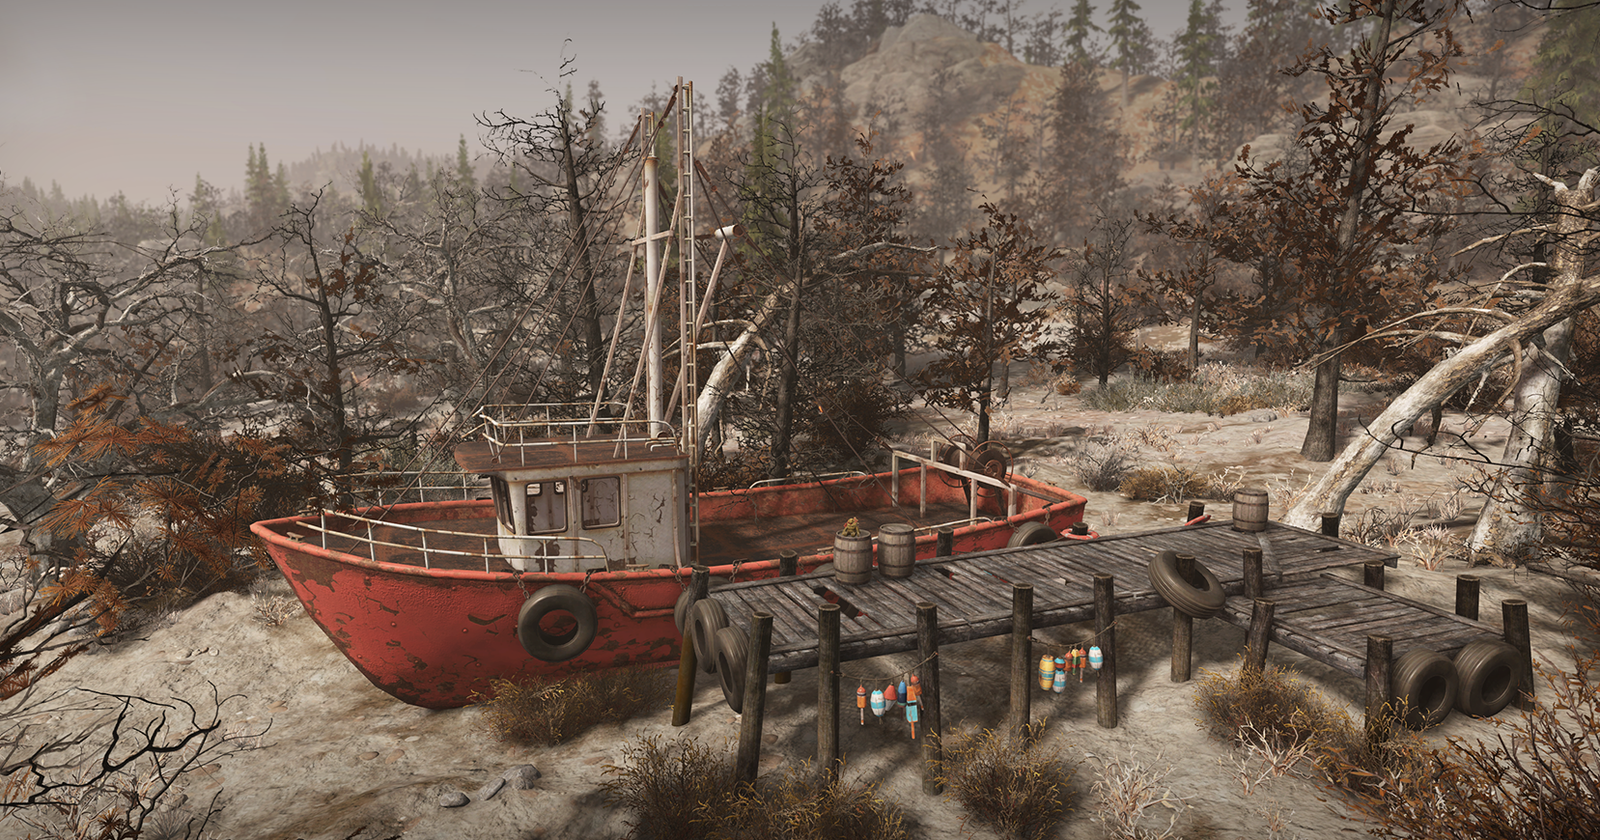 Atomic Shop Update 6th February 2024, Fallout 76 Articles